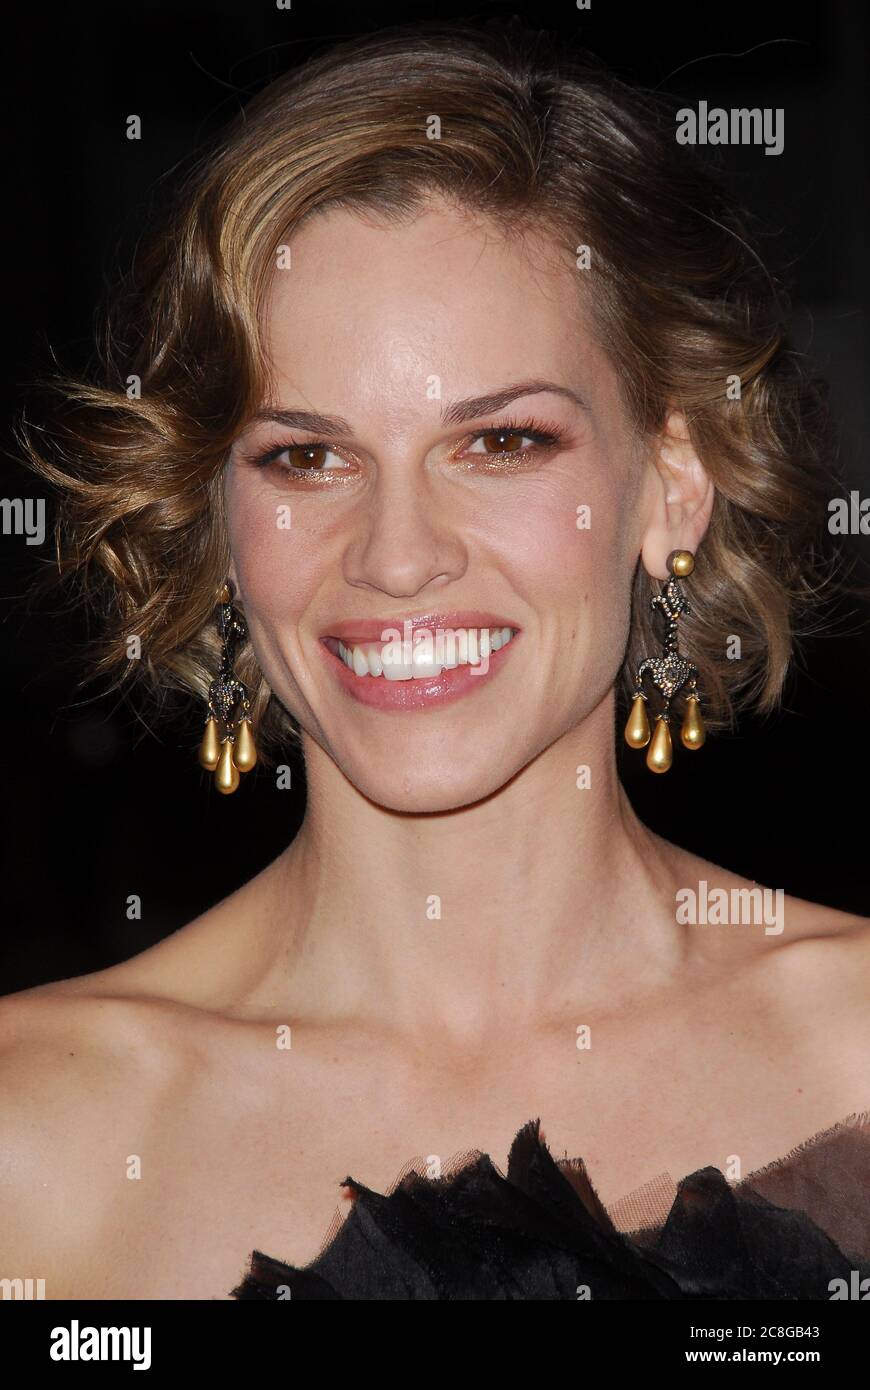 Hilary Swank at the World Premiere of "P.S. I Love You" held at the Grauman's Chinese Theater in Hollywood, CA. The event took place on Sunday, Decemeber 9, 2007. Photo by: SBM / PictureLux  - File Reference # 34006-12565SBMPLX Stock Photo